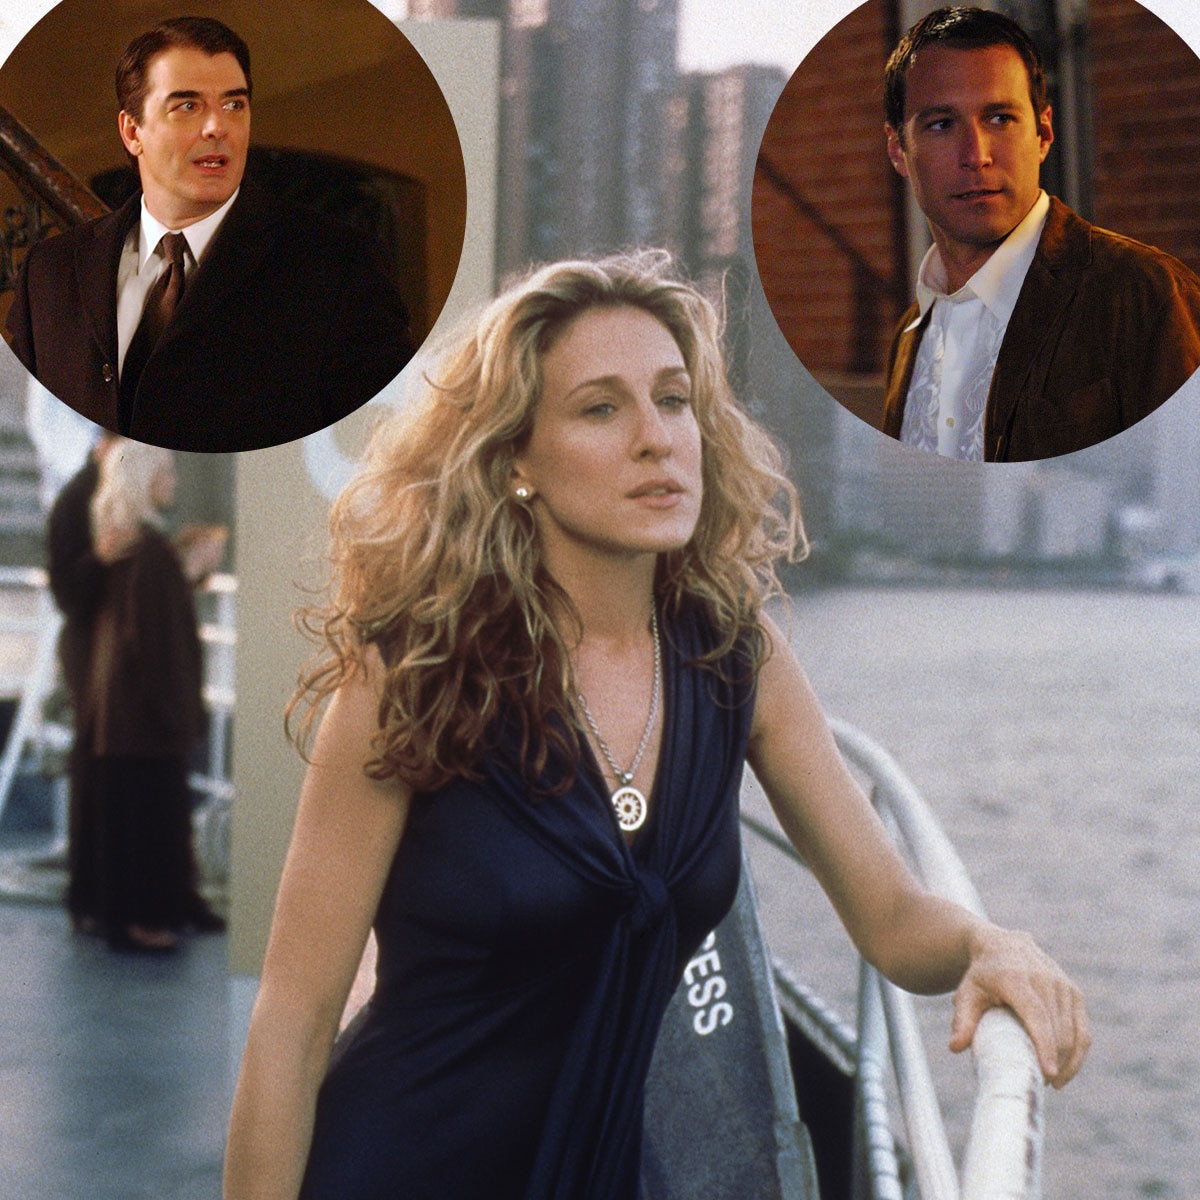 Who Was the Better SATC Boyfriend for Carrie, Aidan or Big?